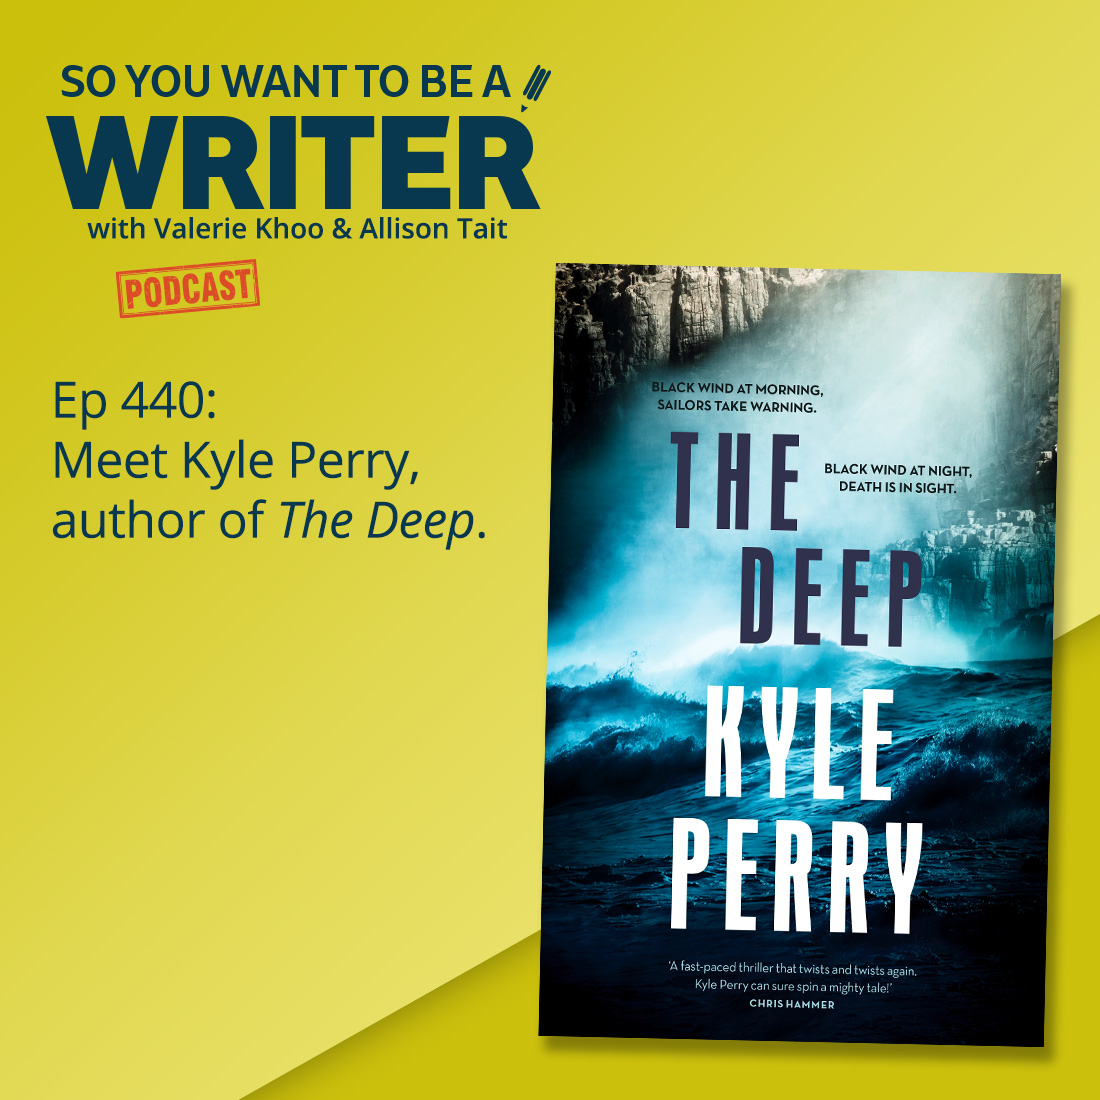 WRITER 440: Meet Kyle Perry, author of 'The Deep'.